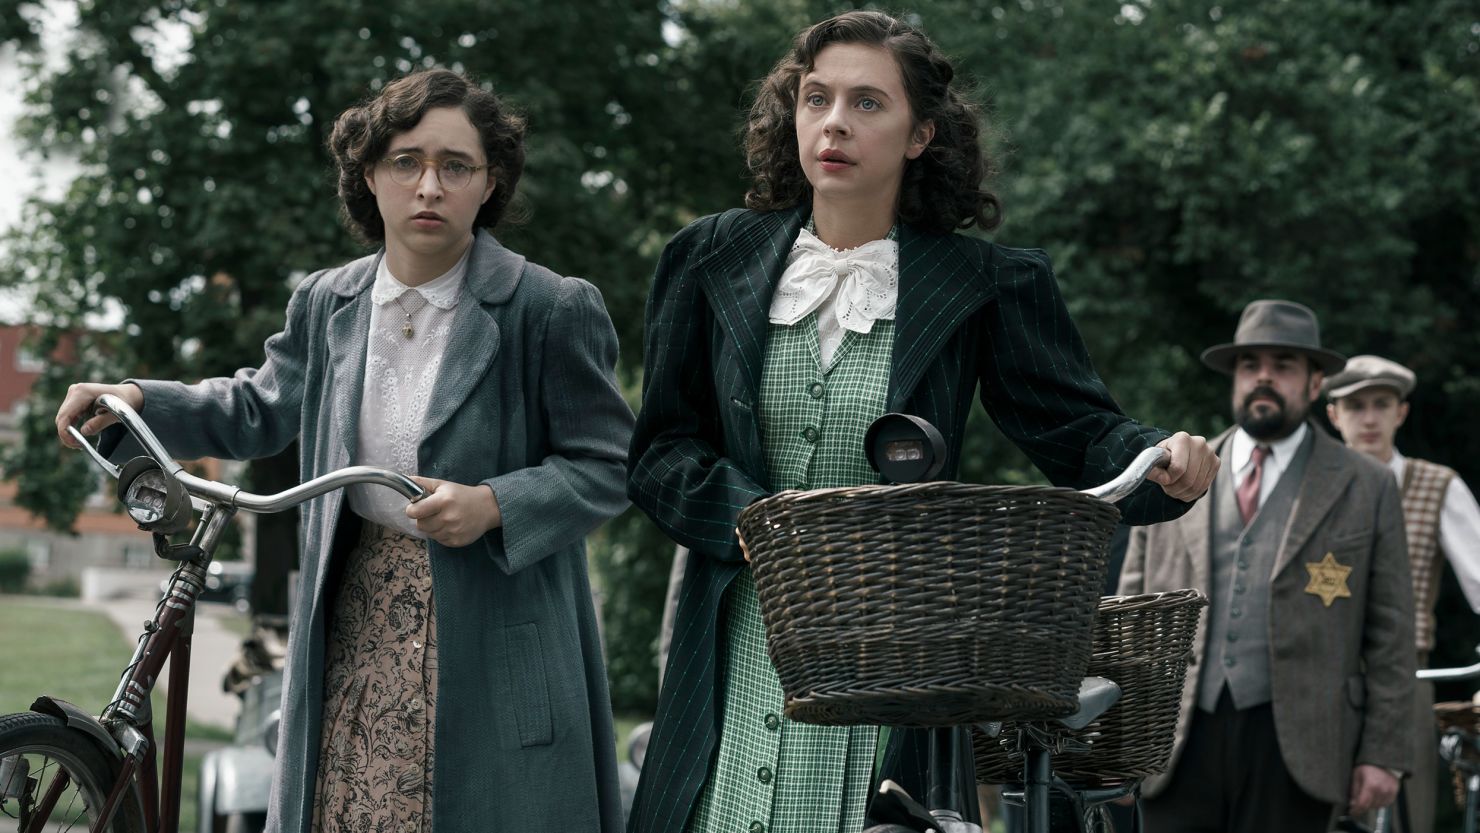 Margot Frank, played by Ashley Brooke, and Miep Gies, played by Bel Powley, arrive at a government checkpoint in A SMALL LIGHT. (Photo credit: National Geographic for Disney/Dusan Martincek)